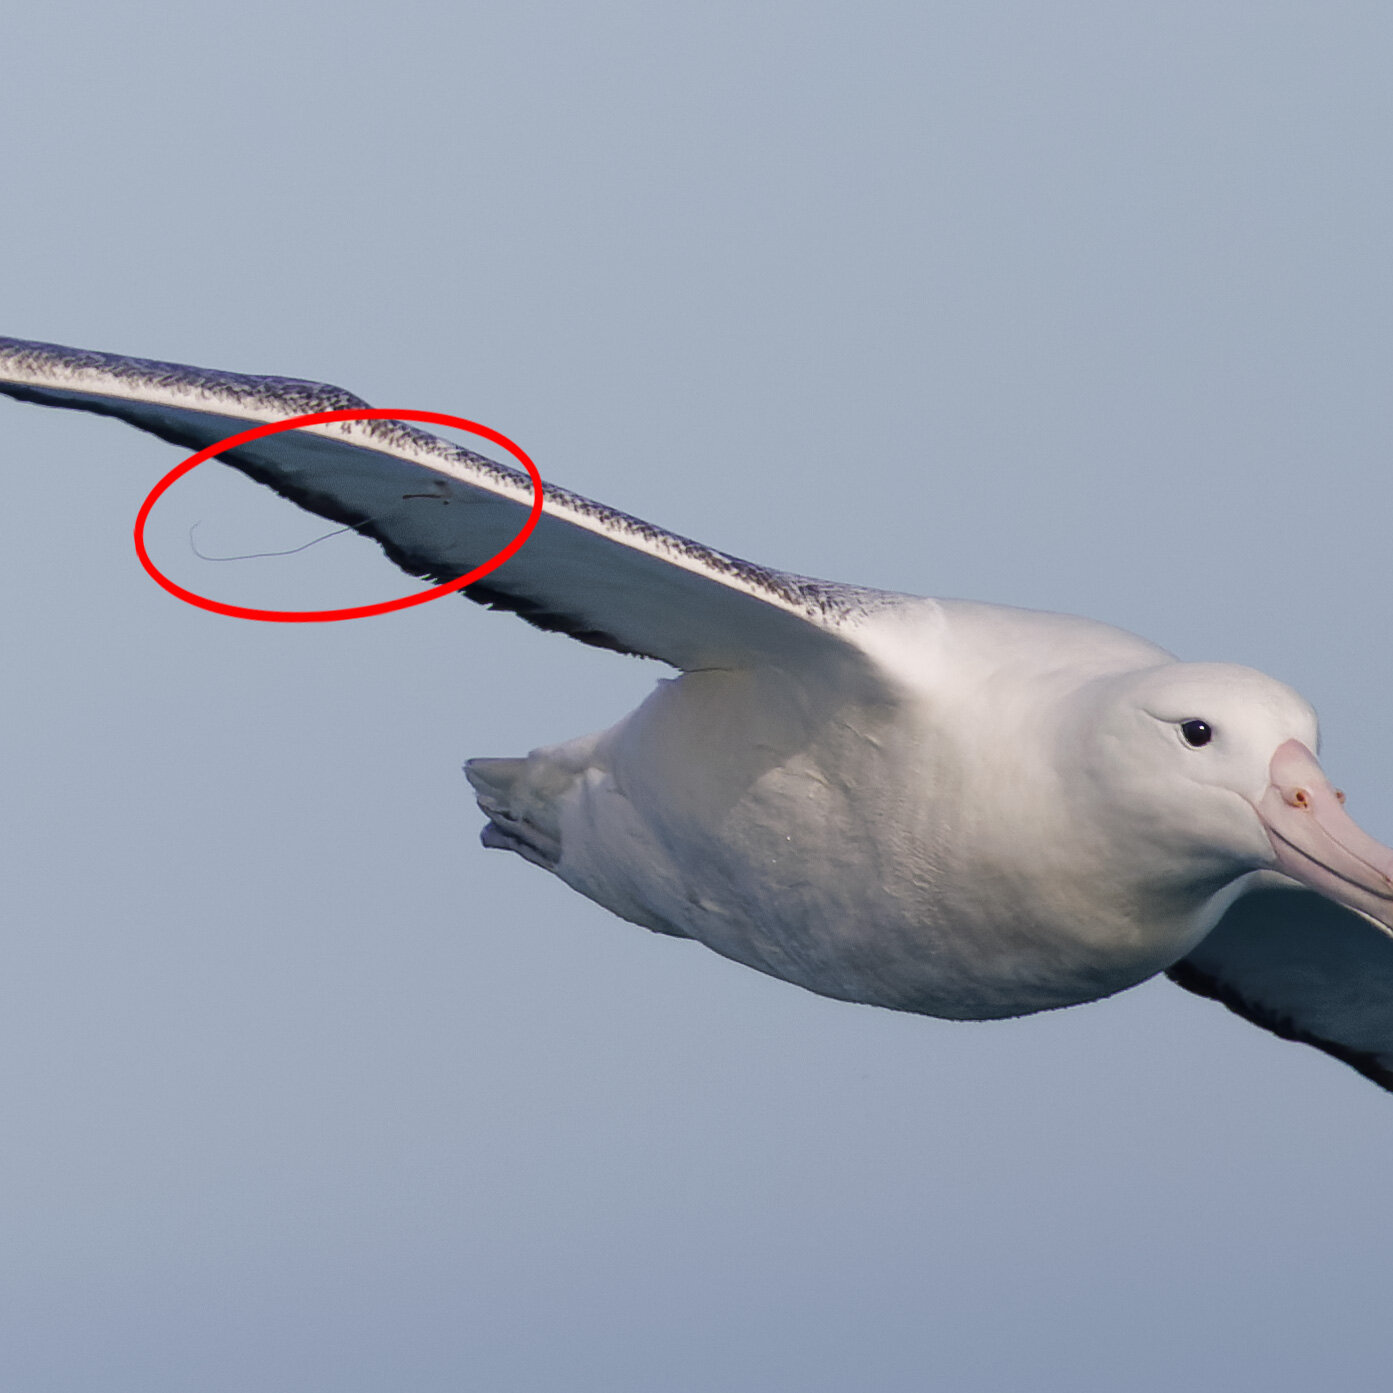 🇳🇿 It&rsquo;s World Albatross Day (19th of June)! A few weeks ago I was very lucky to be surrounded by those majestic birds. When I checked the photos later on, I realised that this one had a hook on its wing. I hope it&rsquo;s only hooked to its f